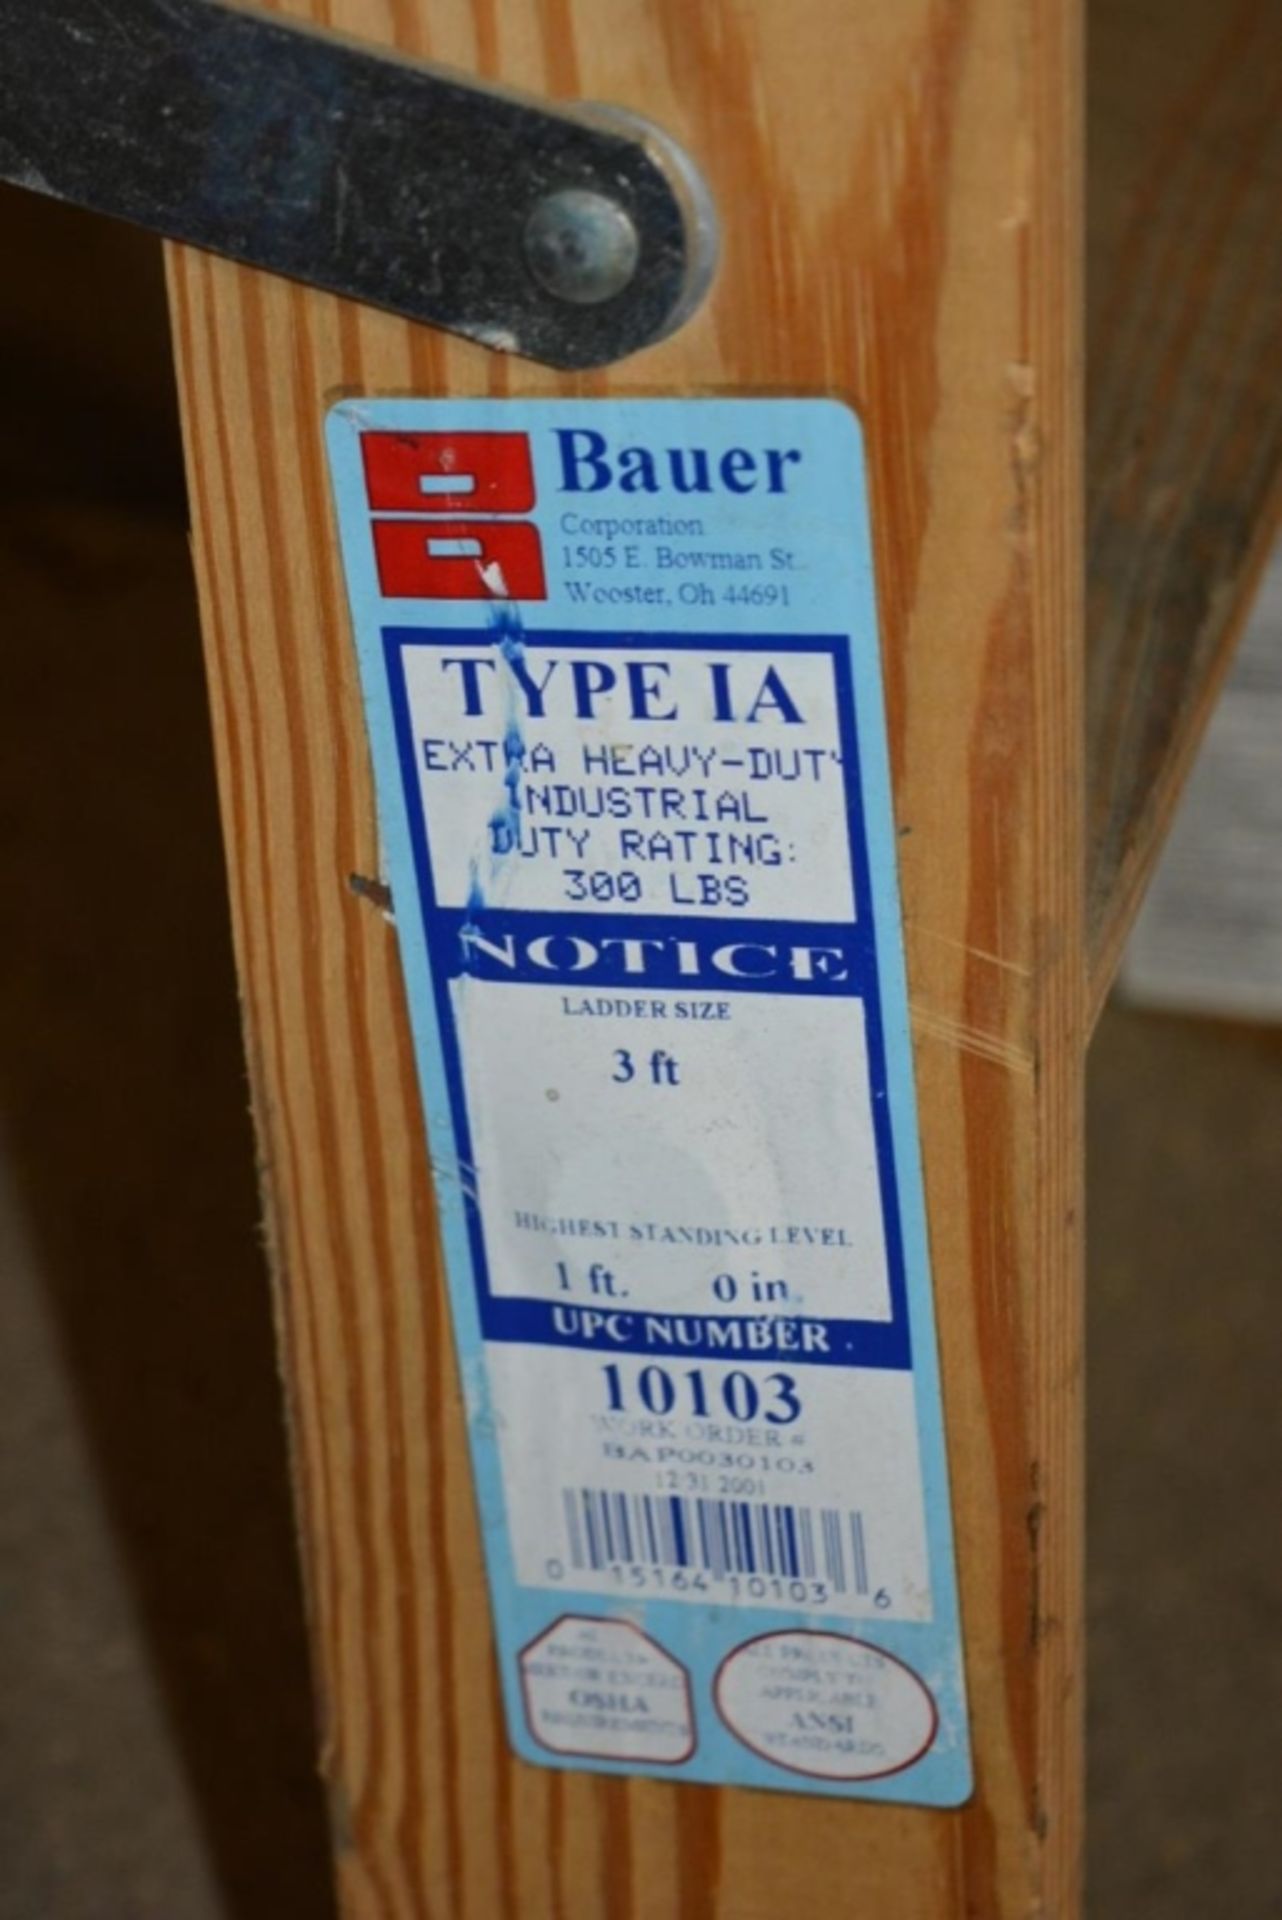 Bauer 10103 Type IA 3-Foot Wood Step Ladder - Image 2 of 2